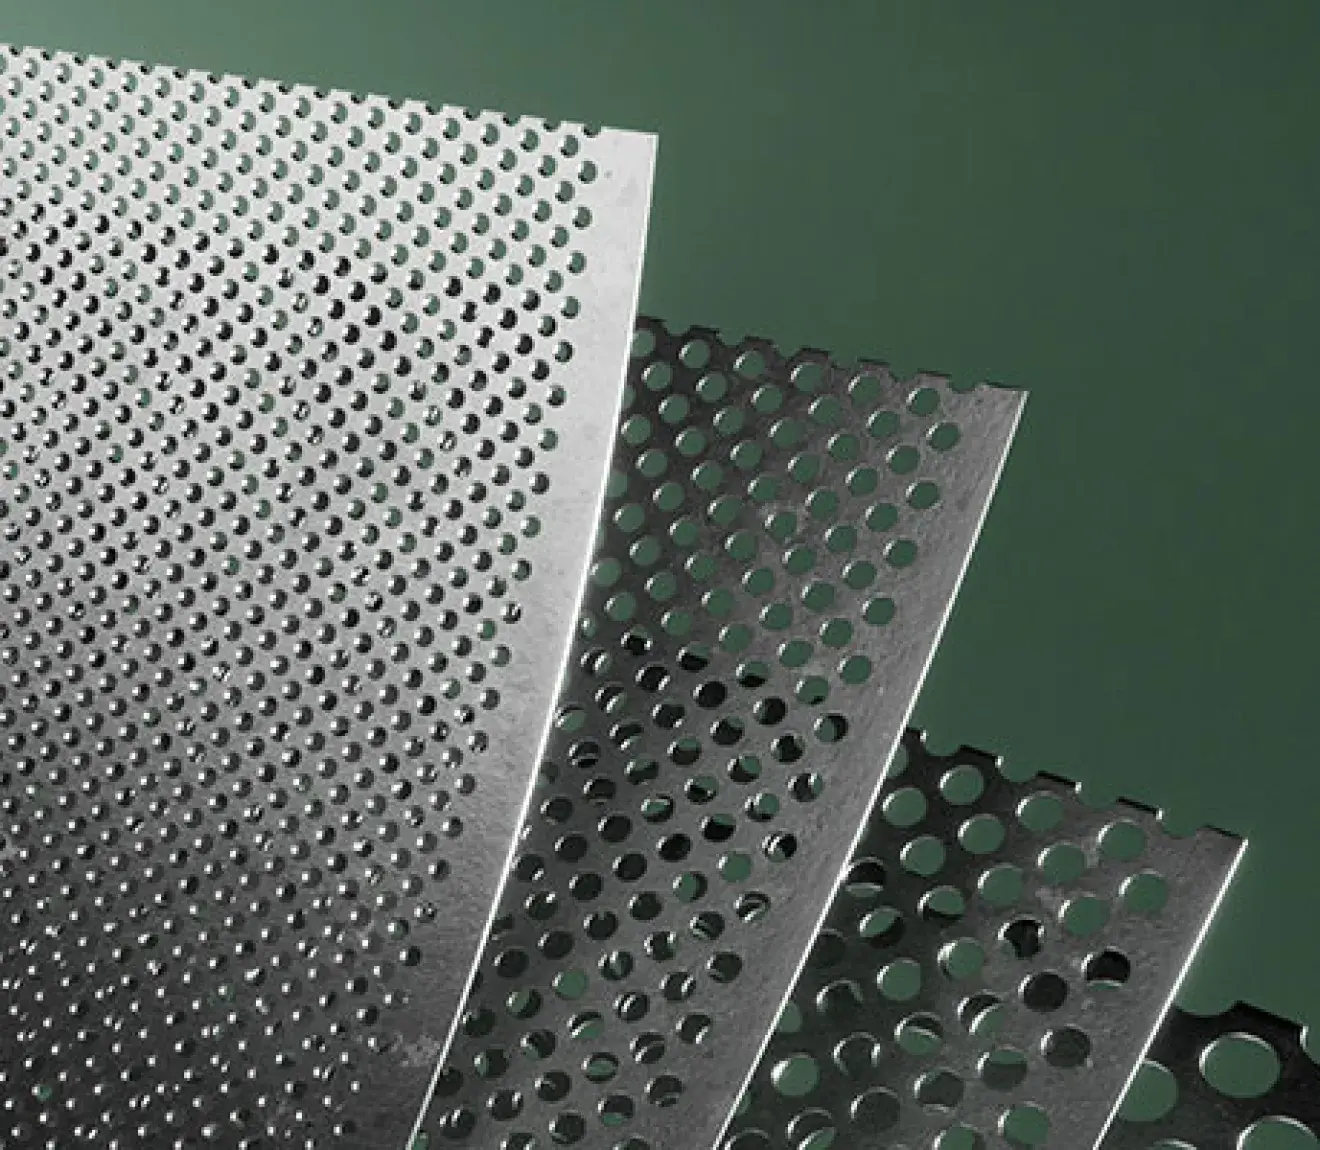 Perforated metal - Round Holes